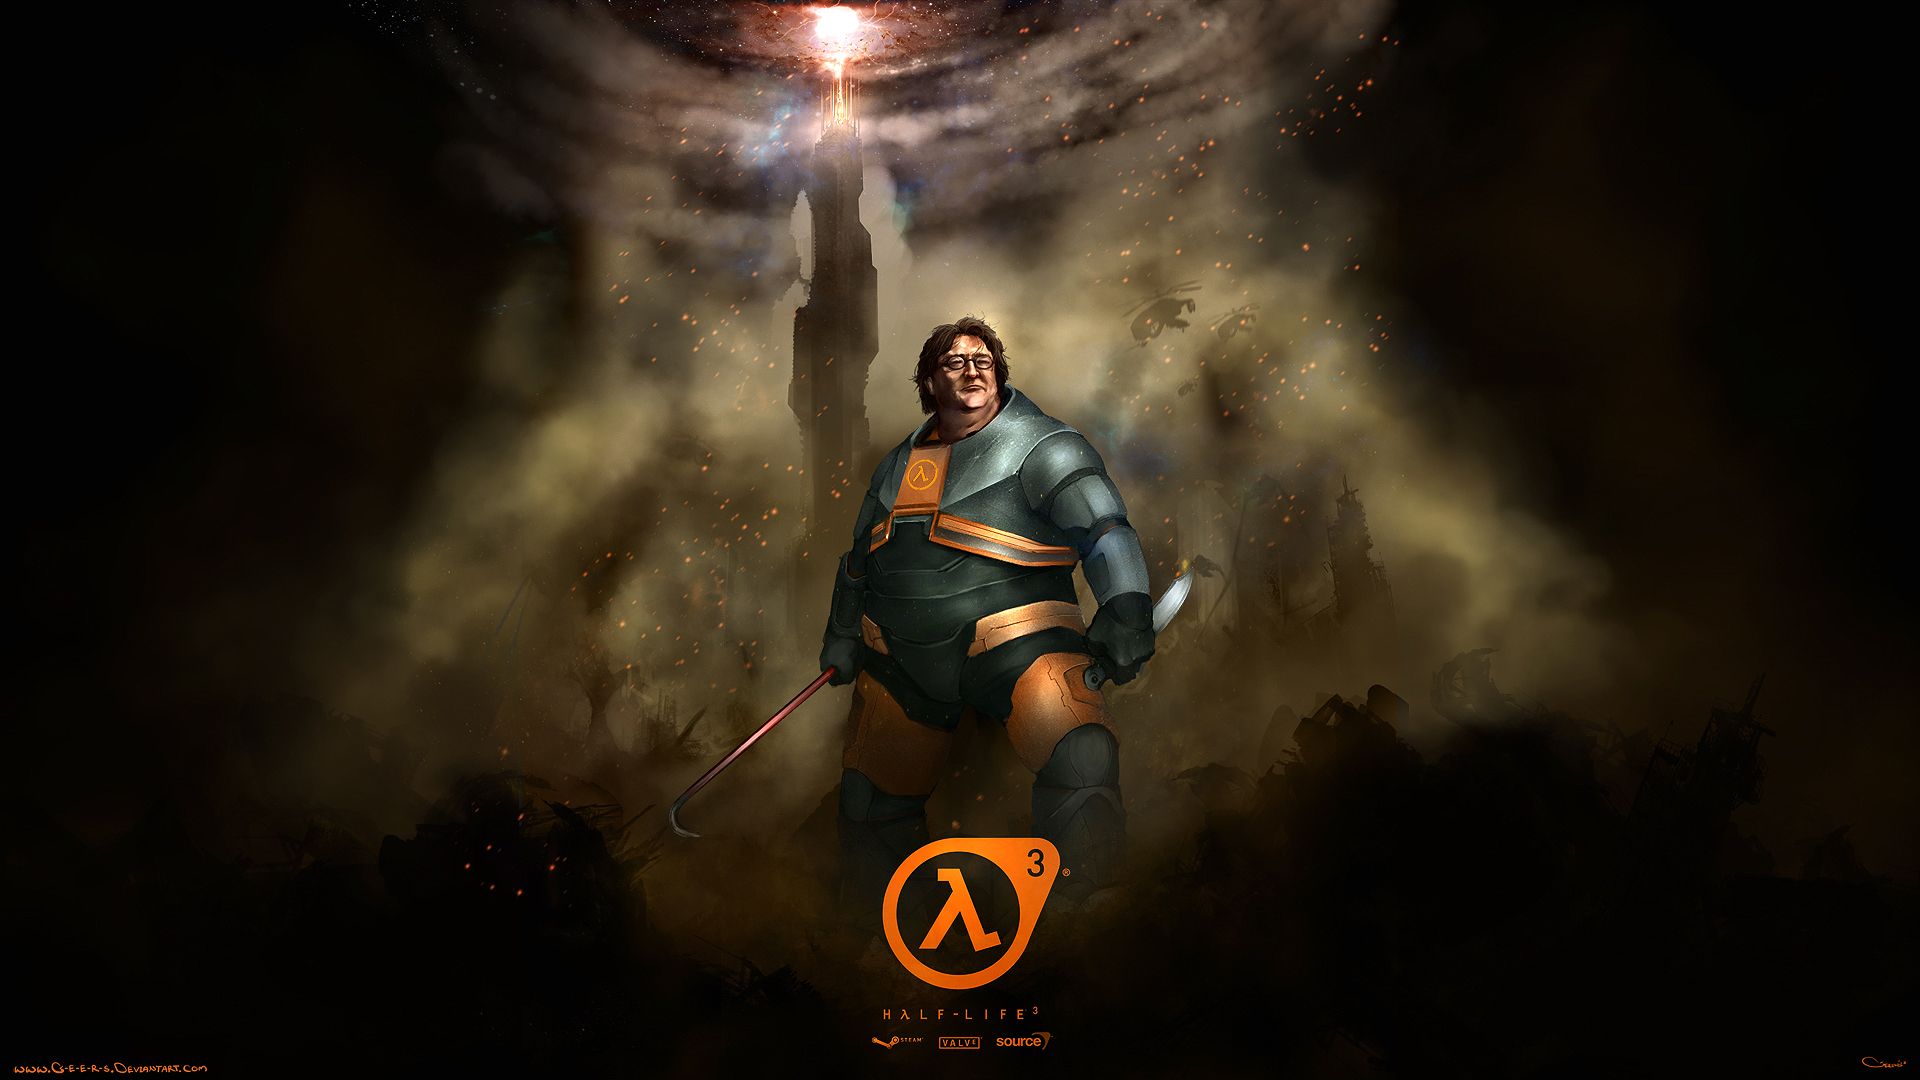 Our Lord And Savior Gaben Gabe Newell Of Valve Cartoon